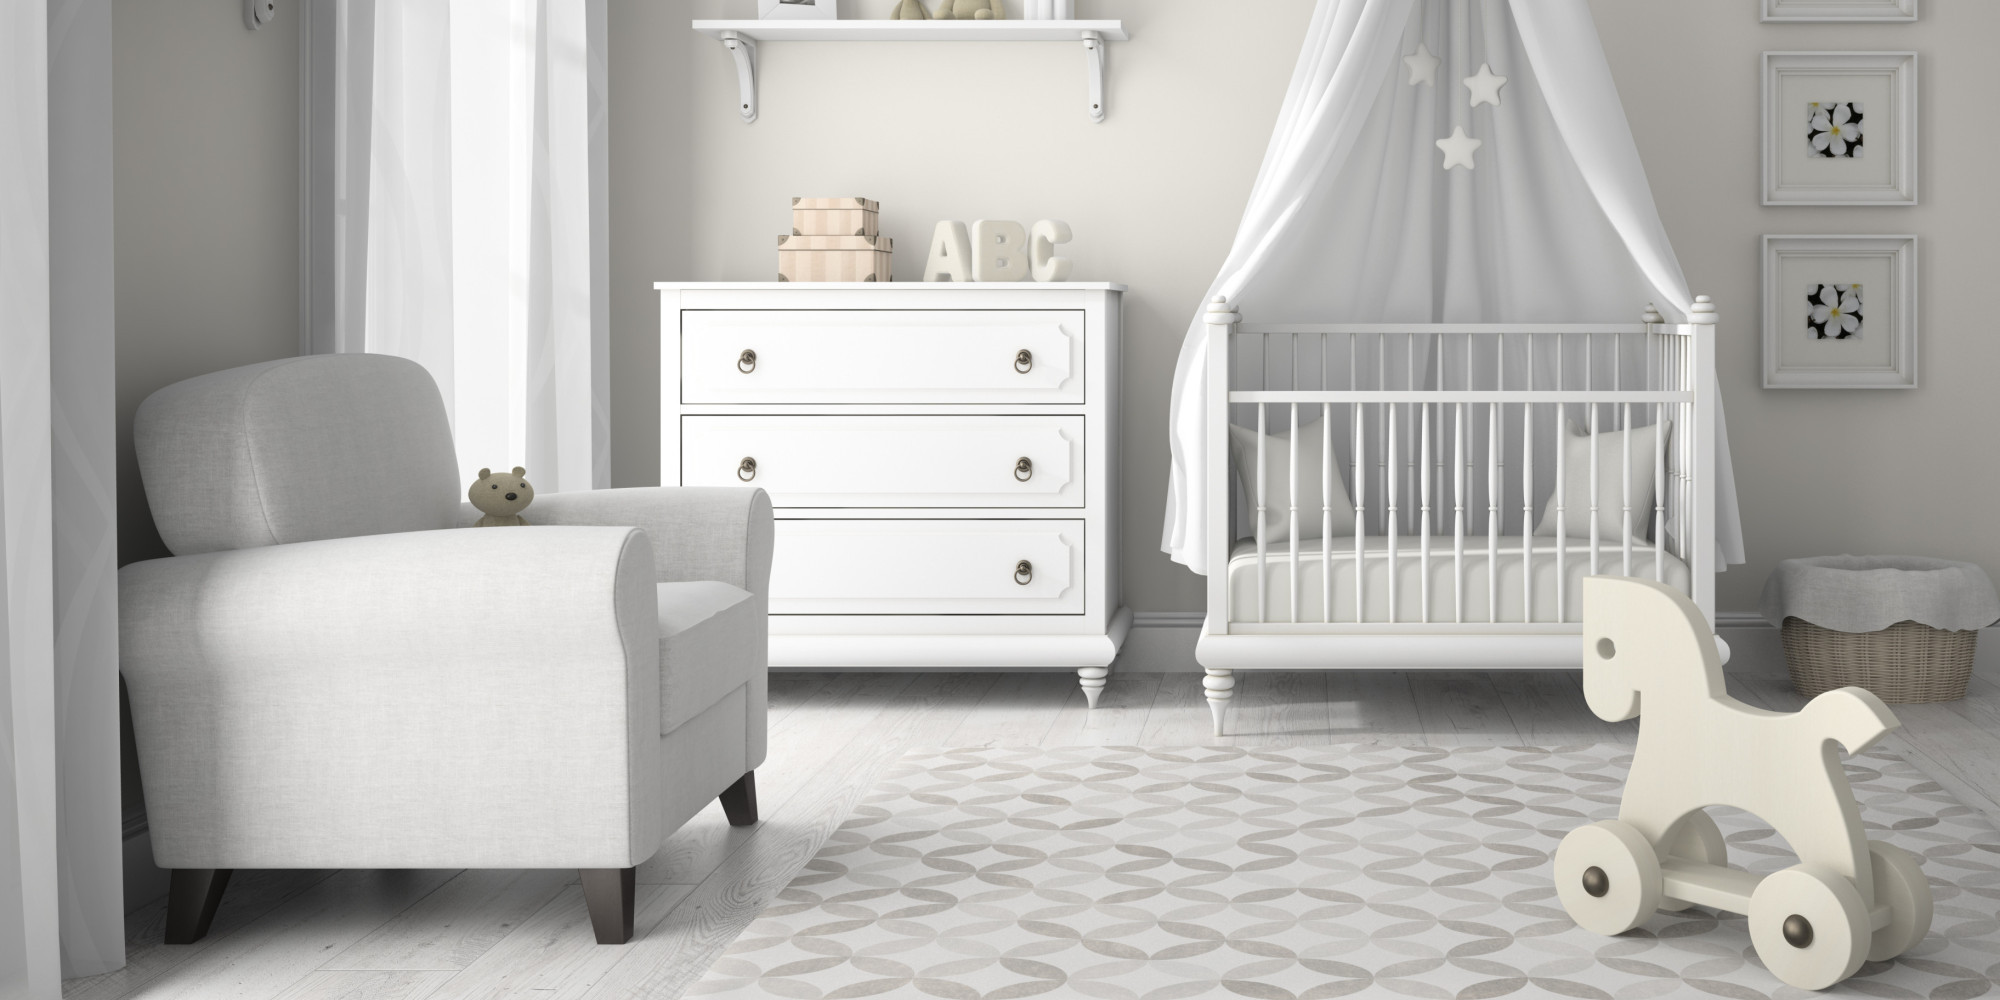 Room Decor For Baby
 How To Decorate Your Baby s Nursery In A Day